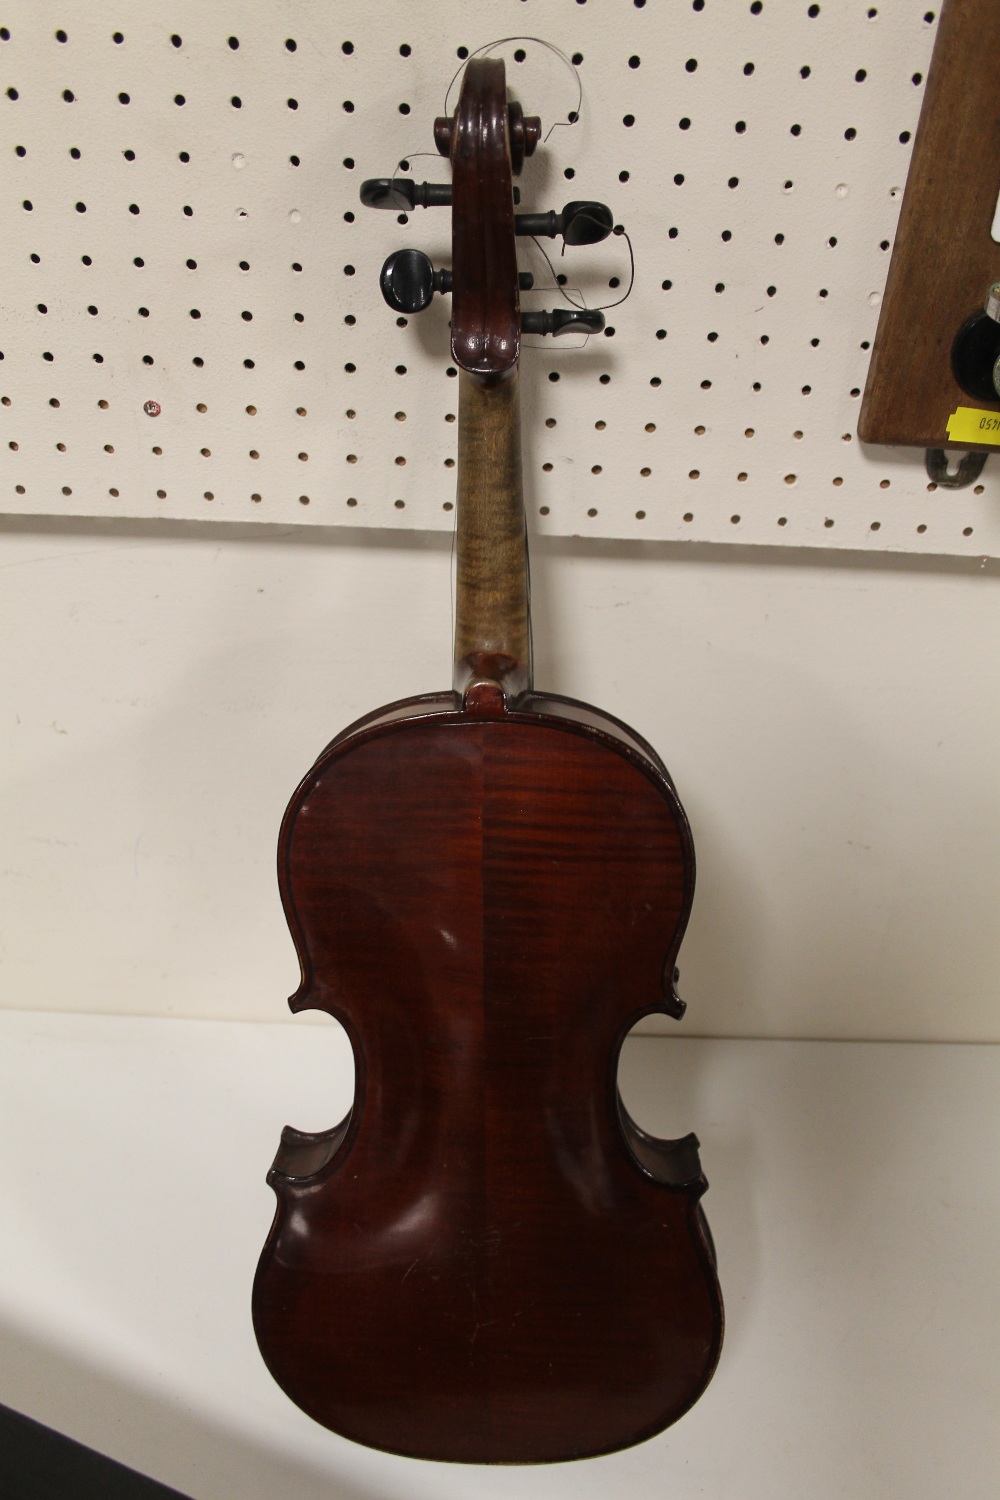 A CASED VINTAGE VIOLIN WITH TWO PIECE BACK - INTERIOR LABEL THE MAIDSTONE, BACK L 34 CM, TOGETHER - Image 3 of 3